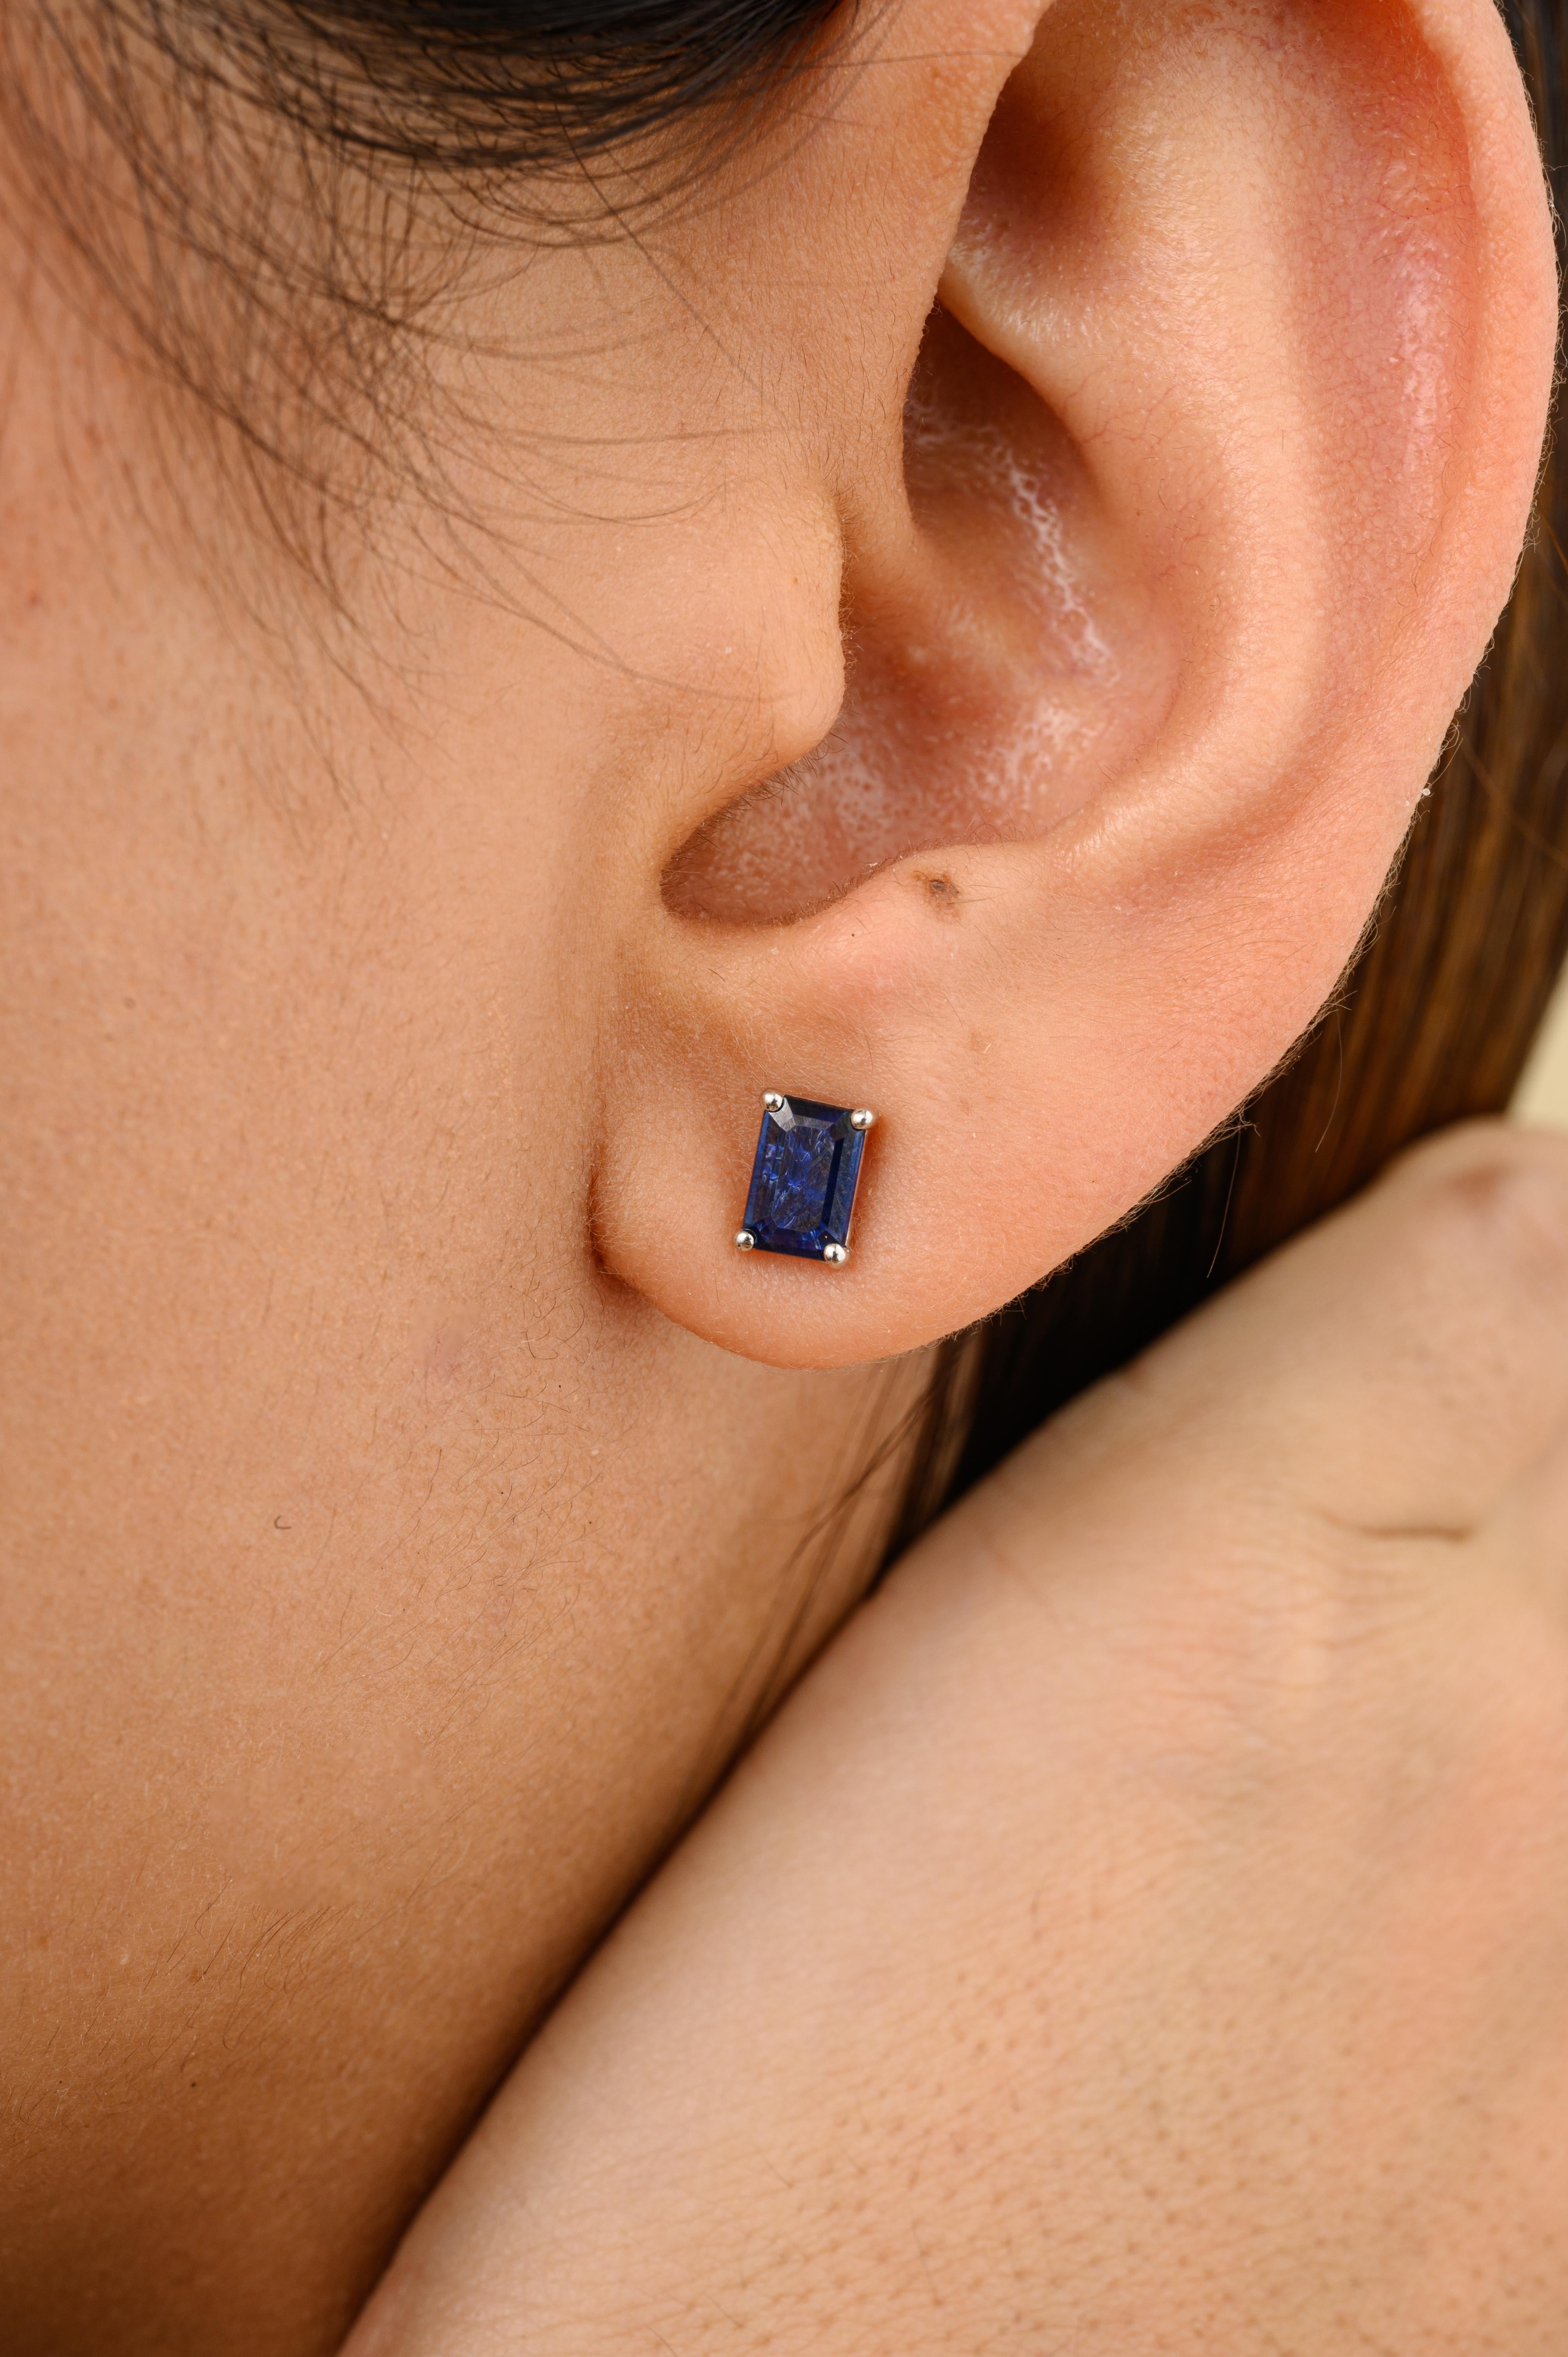 Baguette Deep Blue Sapphire Everyday Stud Earrings for Her in 14K Gold to make a statement with your look. You shall need stud earrings to make a statement with your look. These earrings create a sparkling, luxurious look featuring baguette cut blue